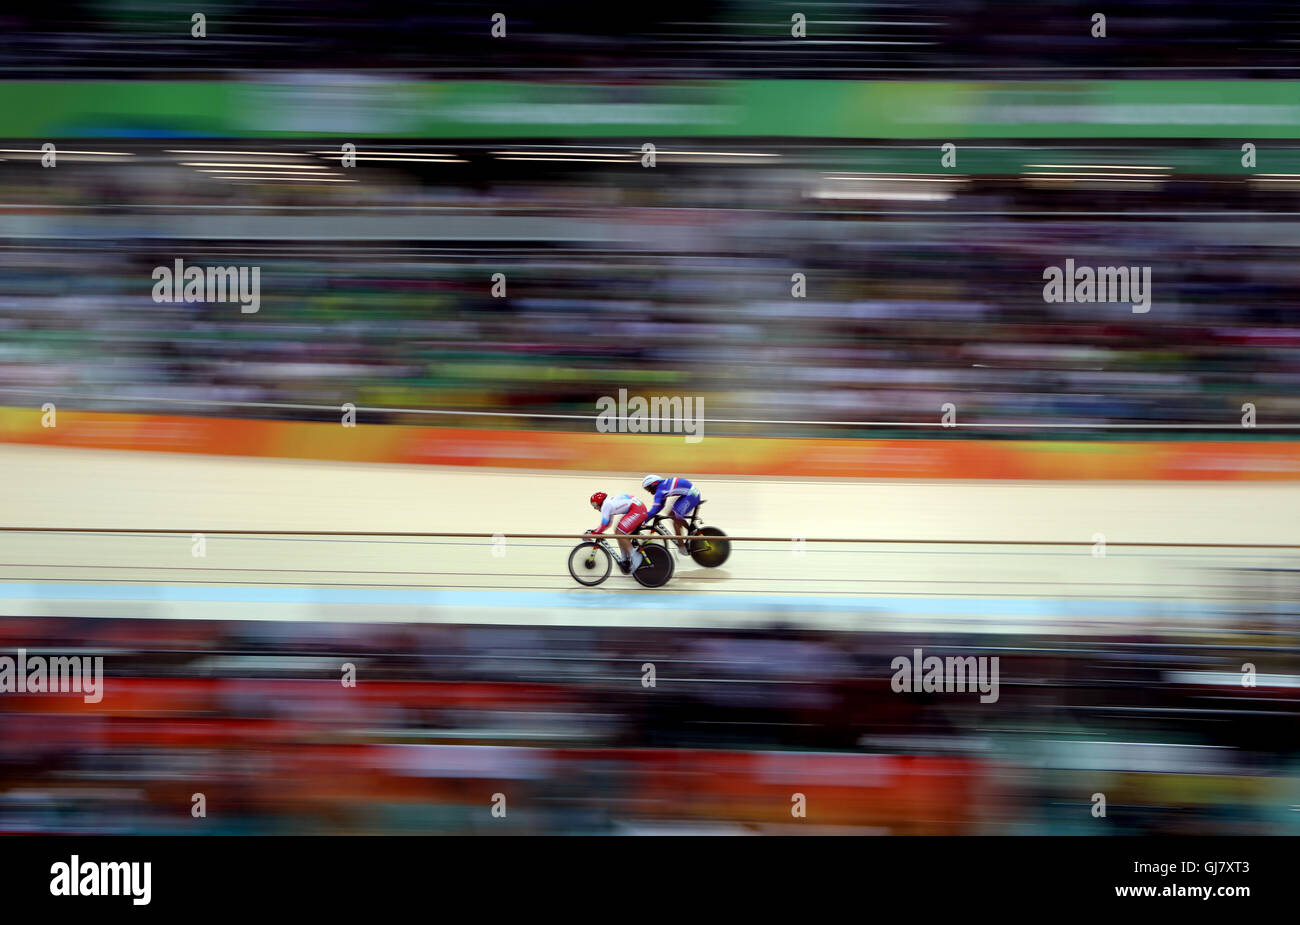 France's Gregory Bauge in action against Russia's Denis Dmitriev during the Men's Sprint Quarter finals on the eighth day of the Rio Olympics Games, Brazil. Stock Photo